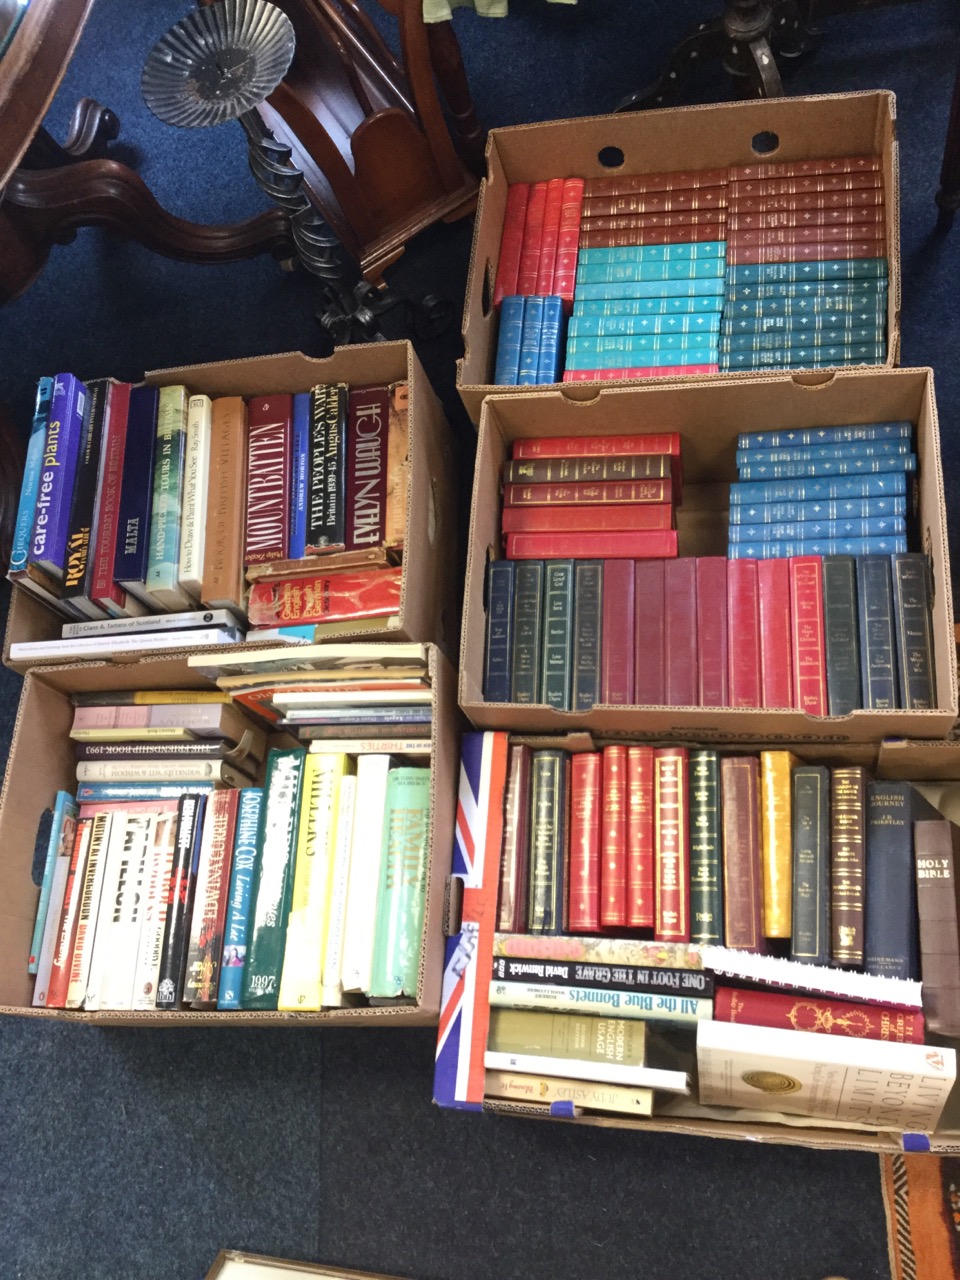 A quantity of books including classics, Readers Digest, fiction, gardening, poetry, antiques, self-